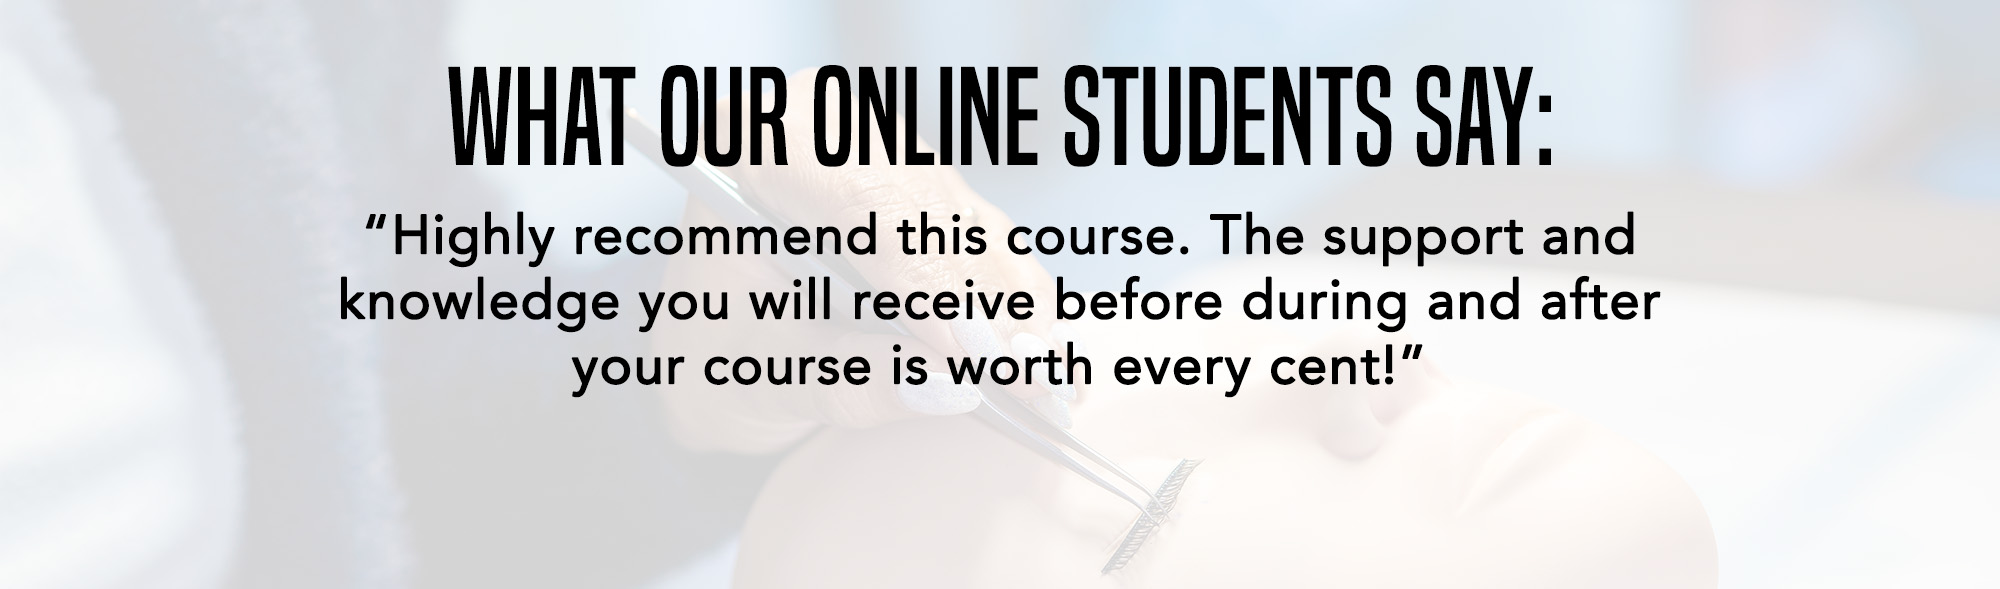 WHAT OUR ONLINE STUDENTS SAY: